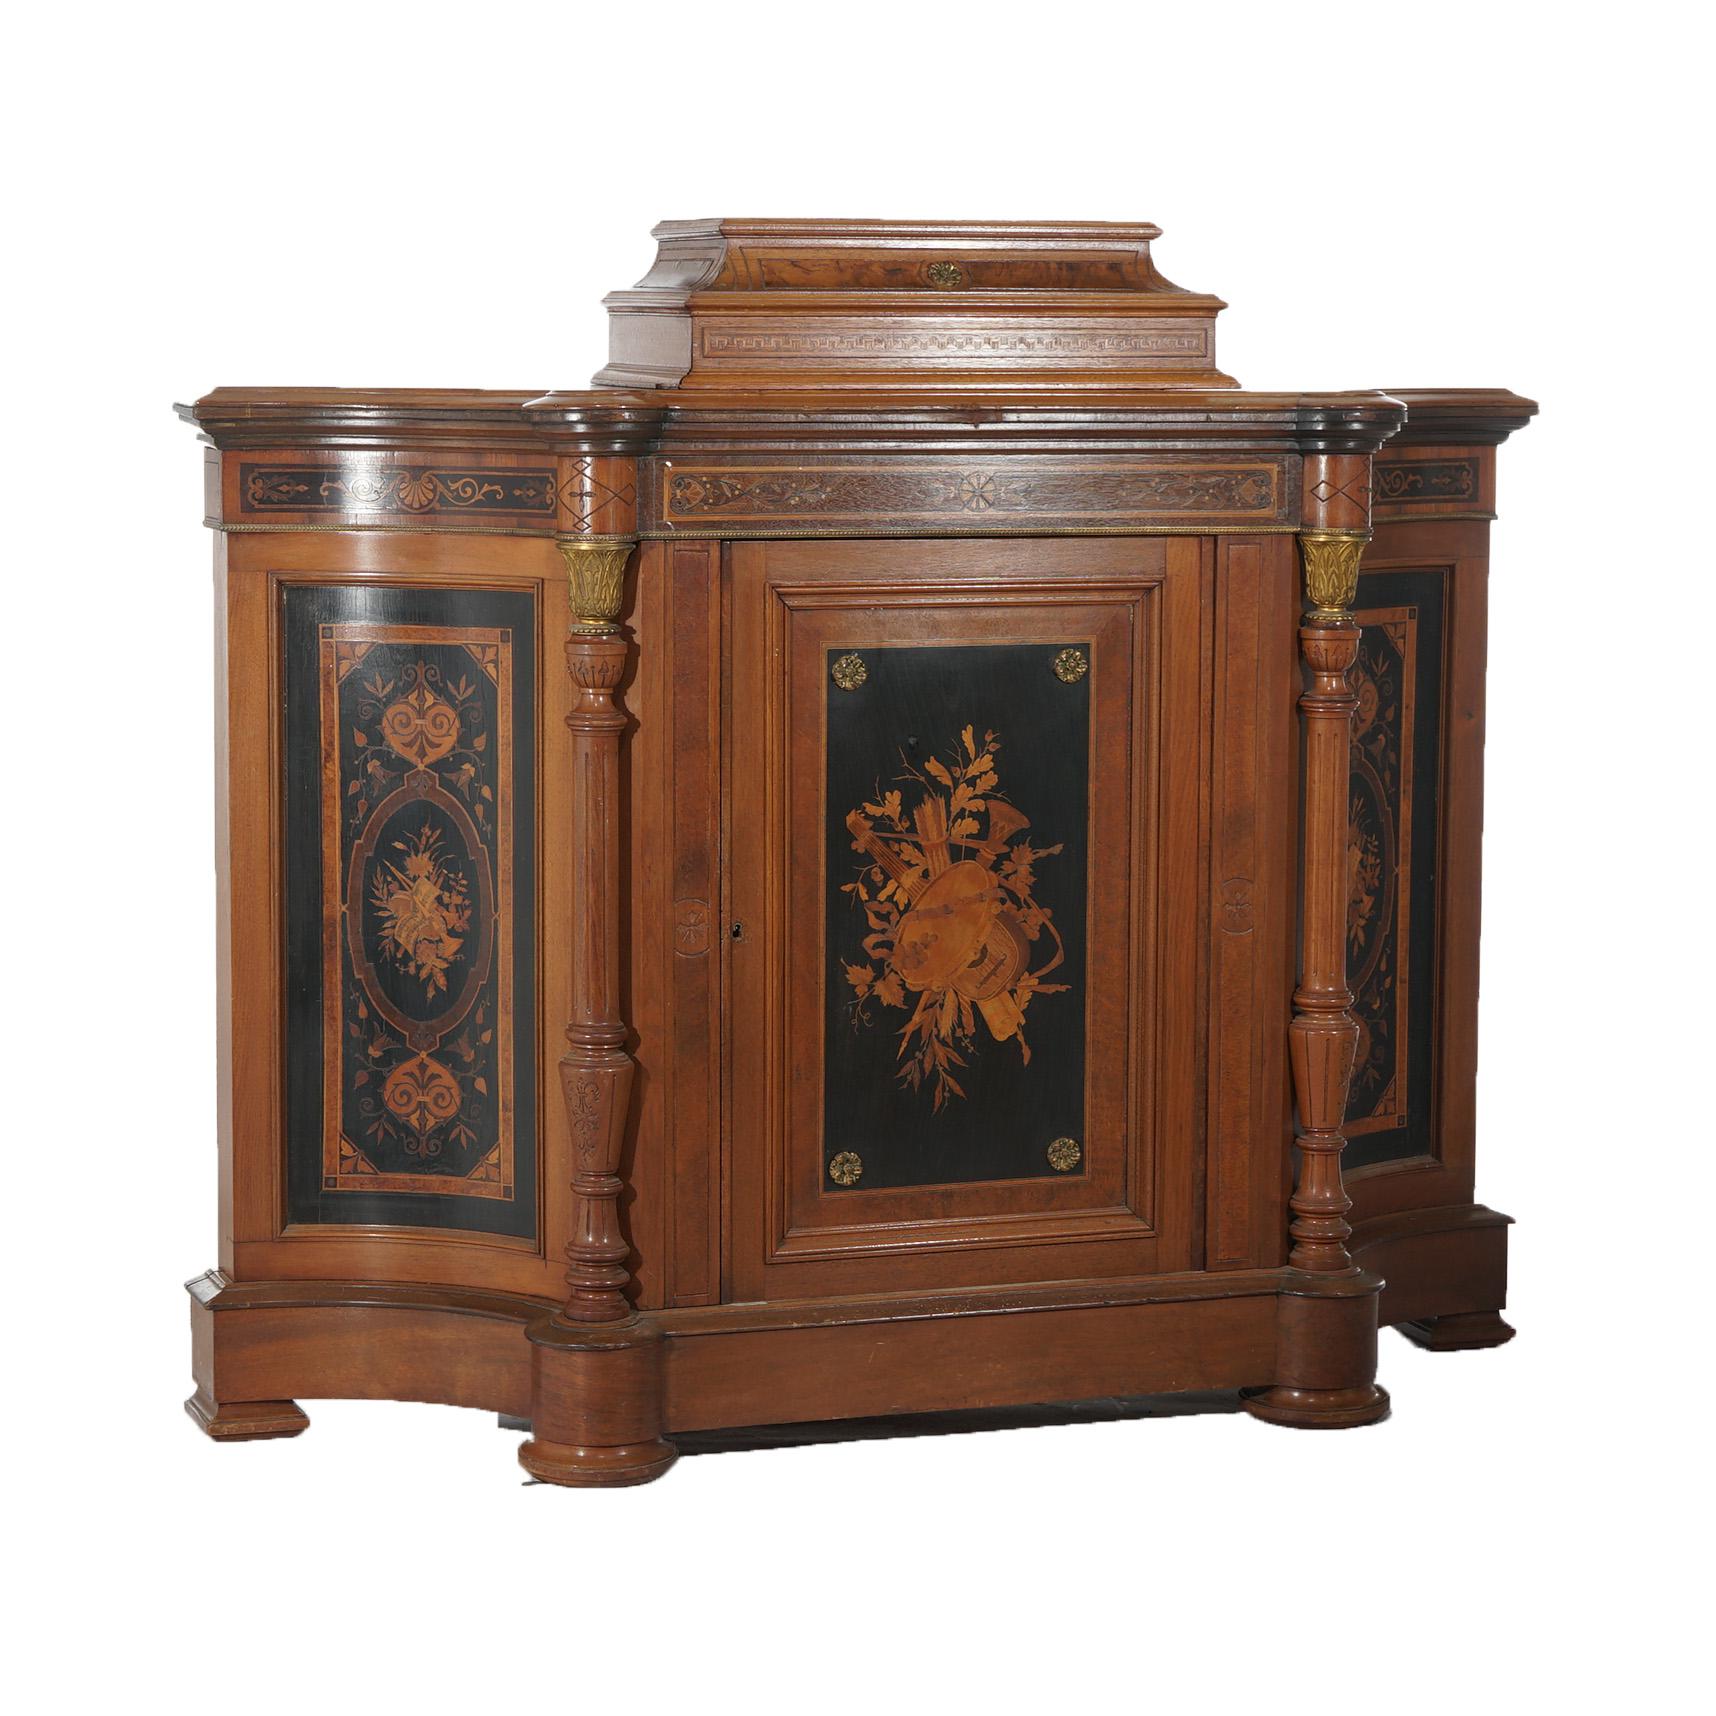 ***Ask About Reduced In-House Delivery Rates - Reliable Professional Service & Fully Insured***
An antique Renaissance Revival Pottier & Stymus credenza offers walnut construction in stylized demilune form and having marquetry inlaid reserves,